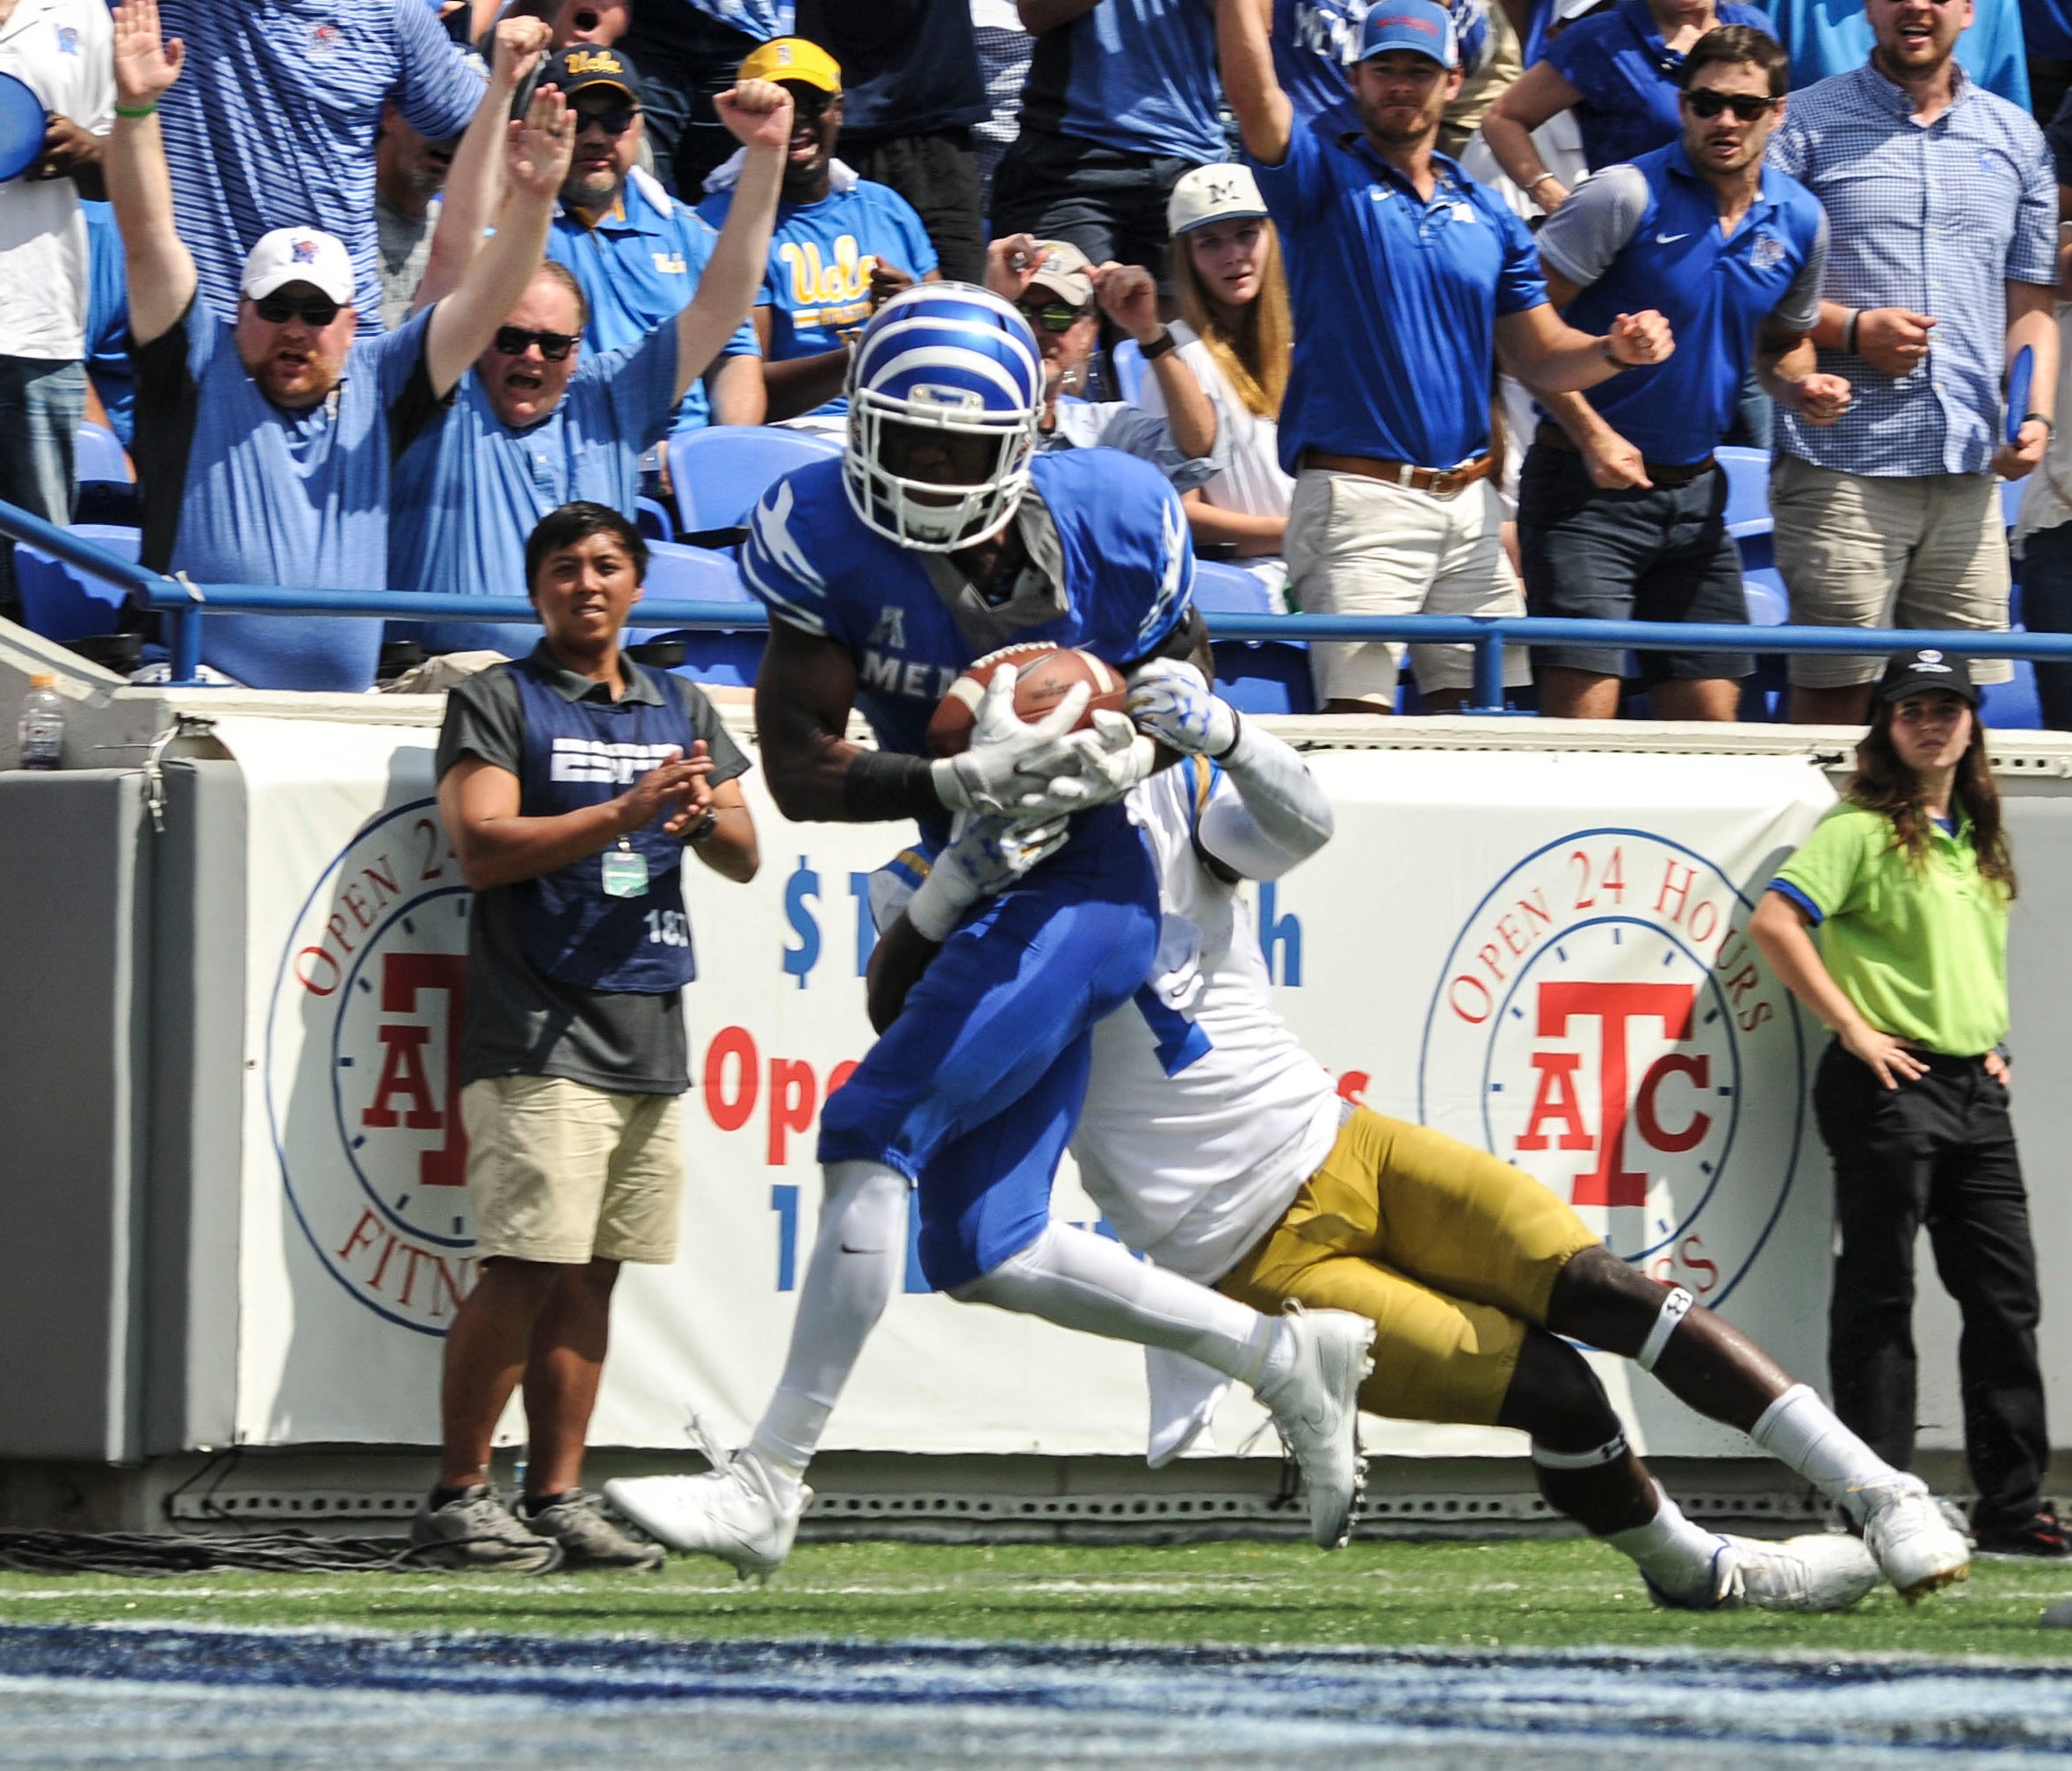 Memphis Tigers wide receiver Anthony Miller scores a touchdown against UCLA.